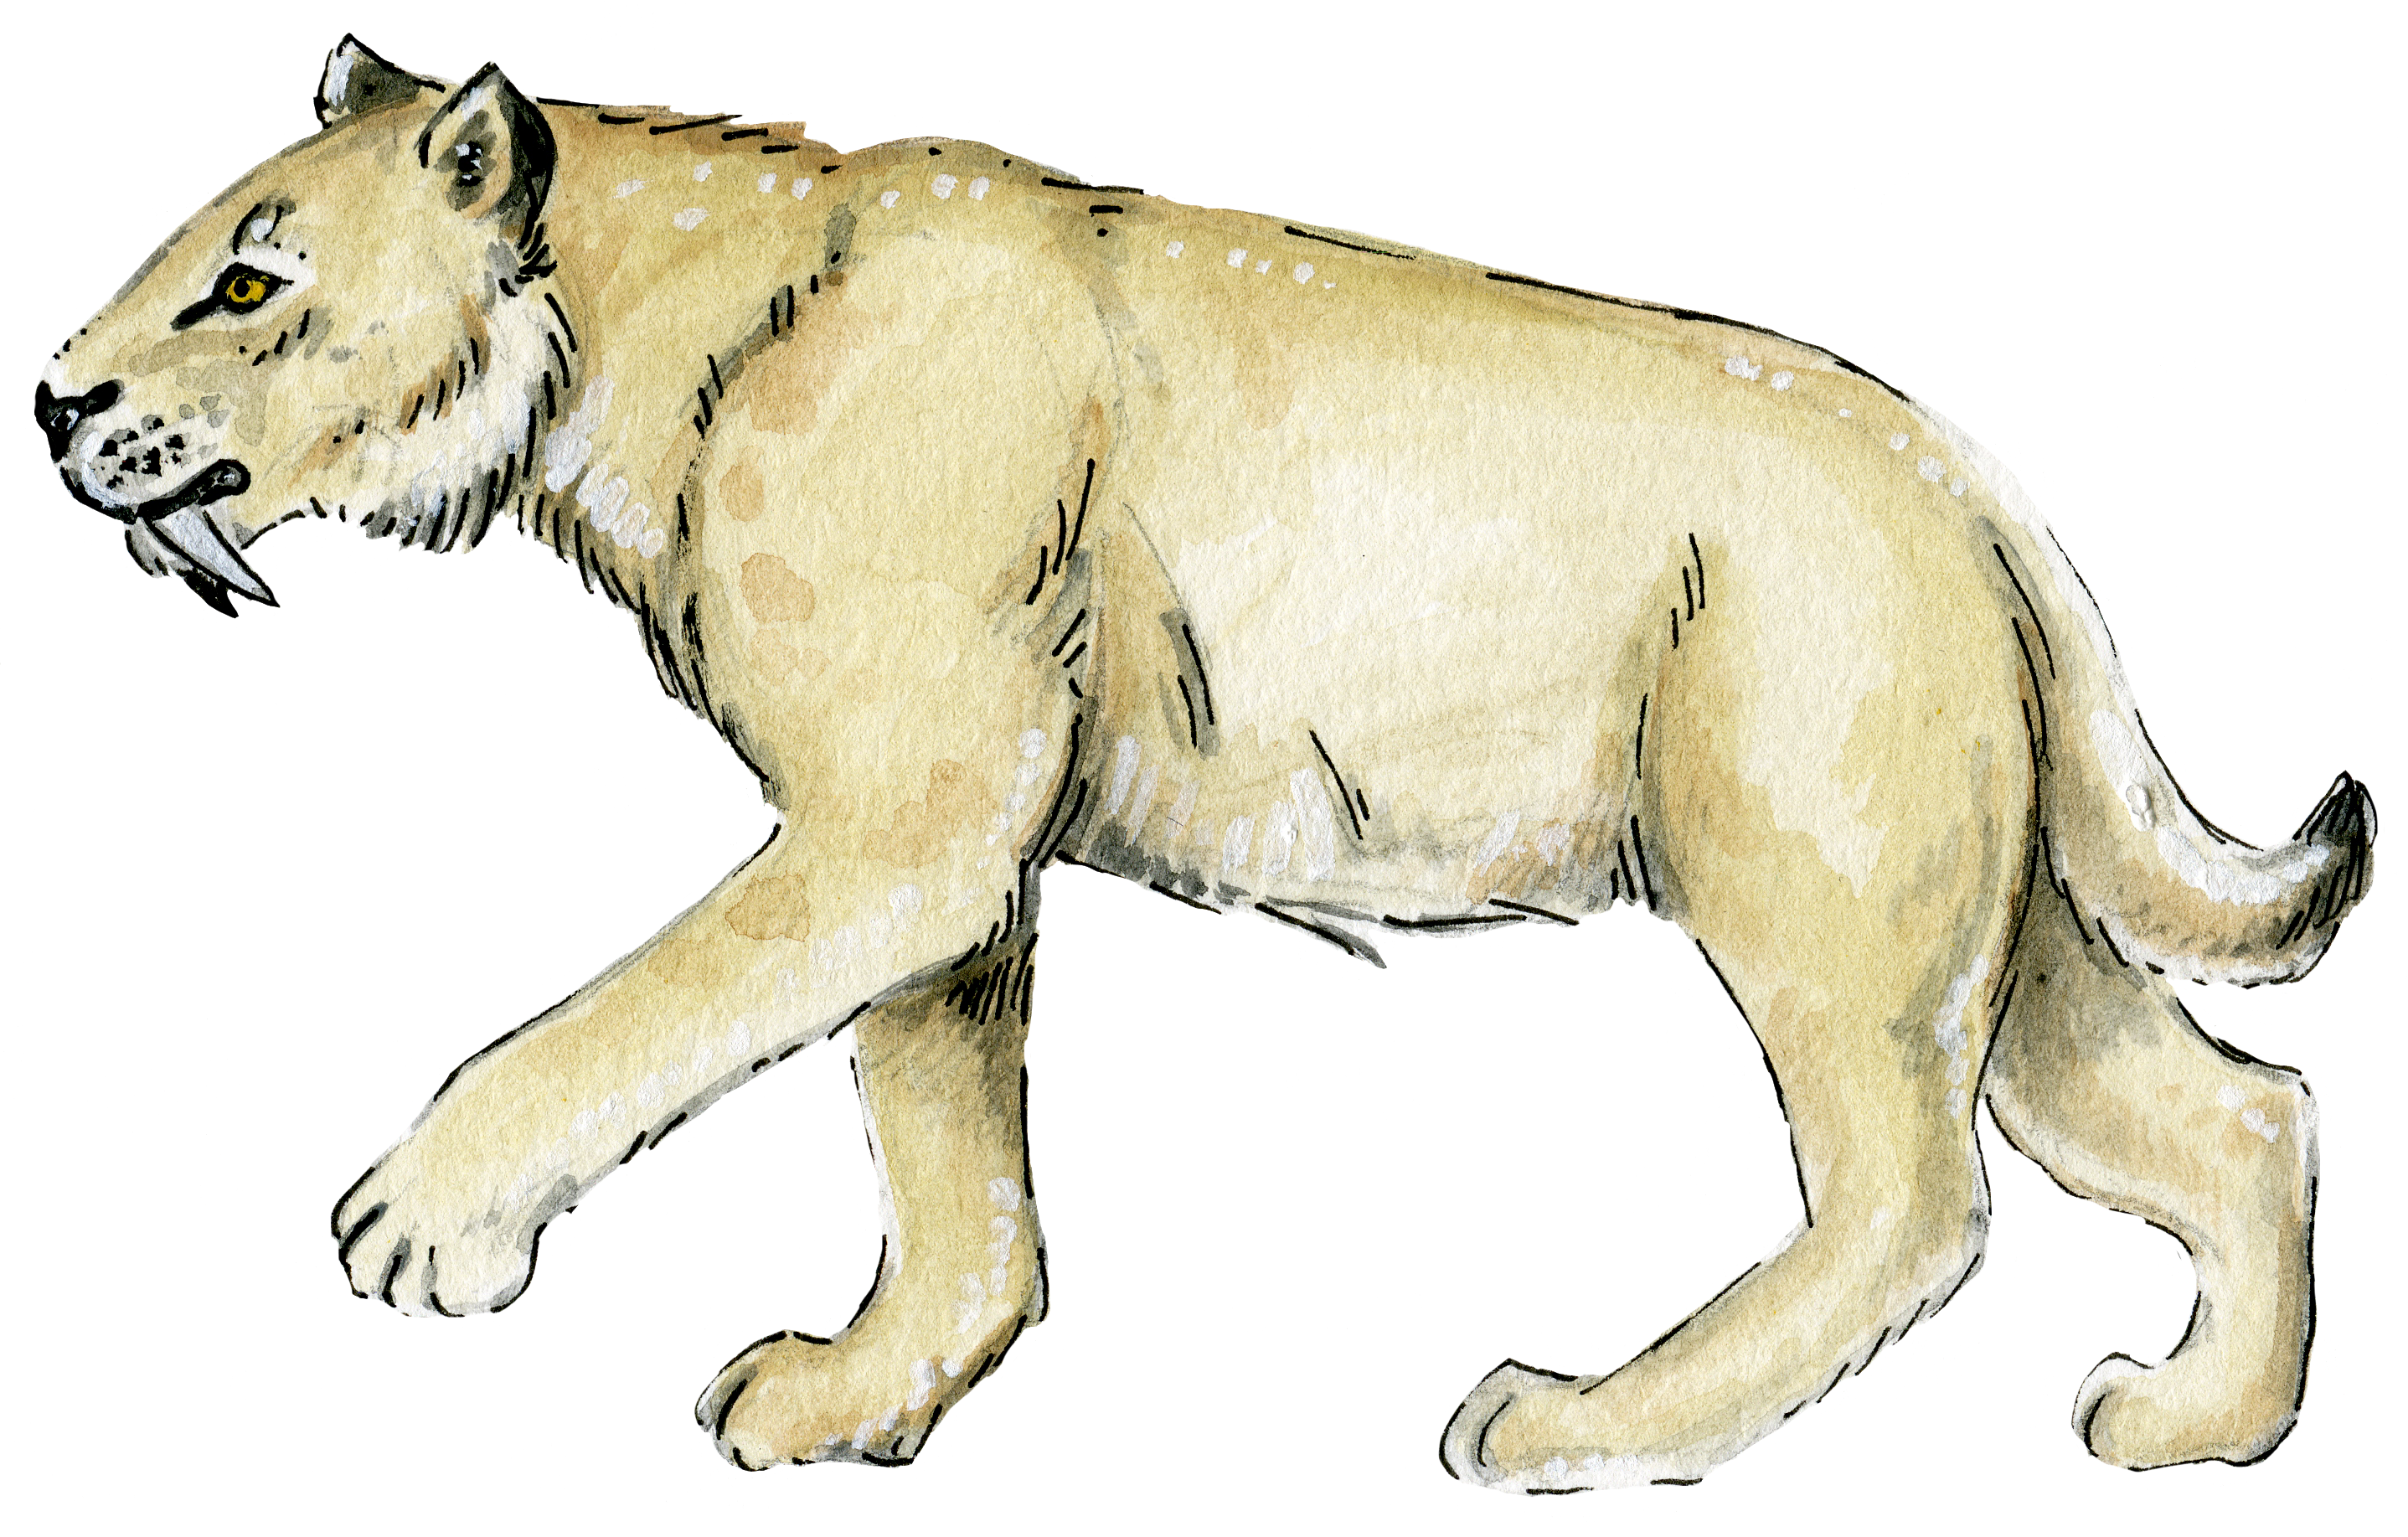 Smilodon or saber tooth cat